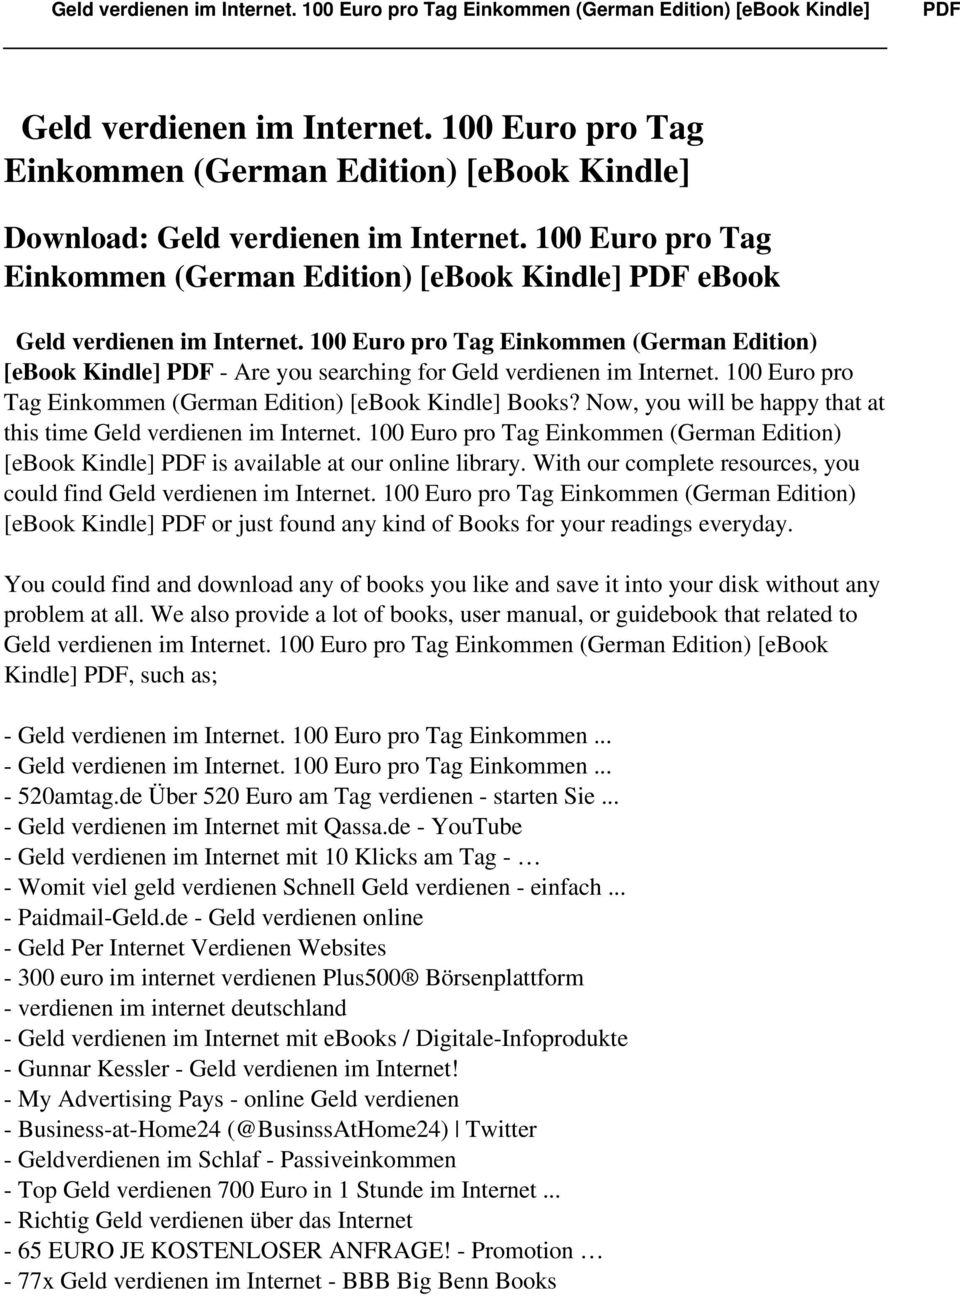 100 Euro pro Tag Einkommen (German Edition) [ebook Kindle] PDF - Are you searching for Geld verdienen im Internet. 100 Euro pro Tag Einkommen (German Edition) [ebook Kindle] Books?